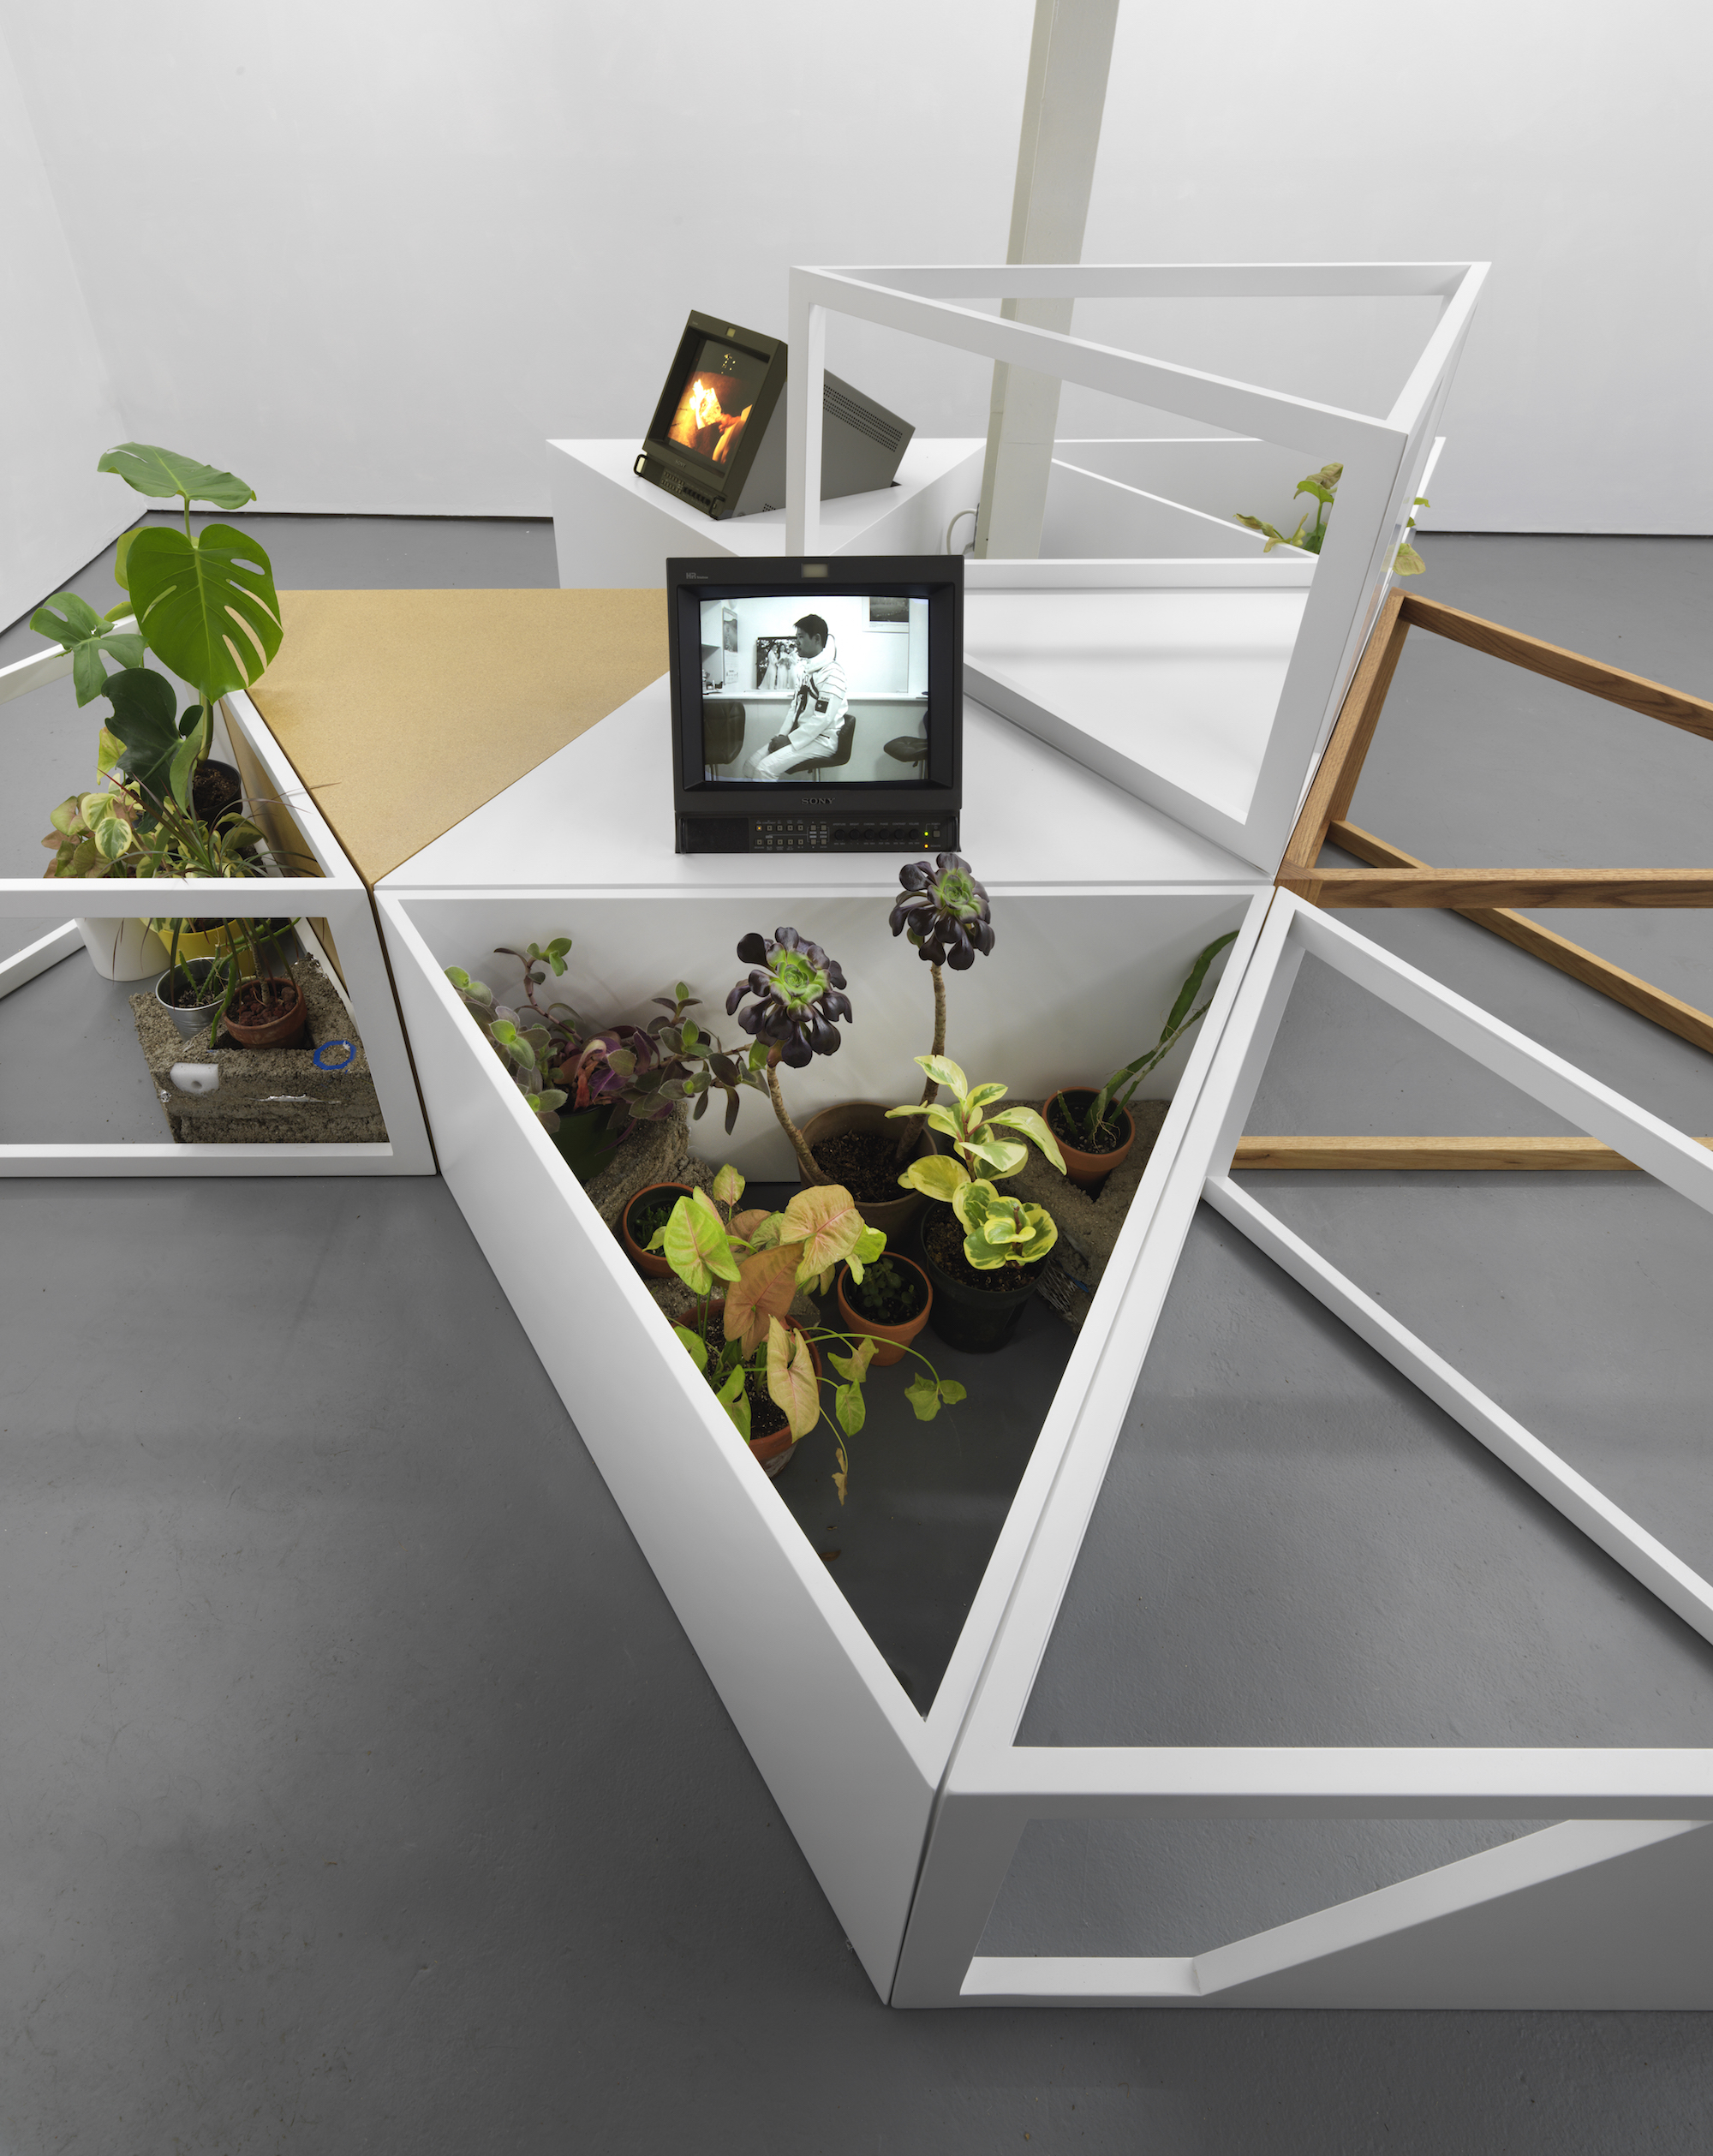 Image: Photo of multiple white and brown wooden triangle segments joined alongside each other, with one stacked on top. Two segments in the foreground hold varied amounts of potted plants with green, purple, and yellow leaves. Set on the top of one segment is a TV screen directly facing the viewer. The screen shows black and white image of a cosmonaut sitting sideways on a chair in a space suit without a helmet. In the background, a second TV is faced at an angle and tilted upwards displaying a yellow, red, and black image. Image courtesy of artist. 